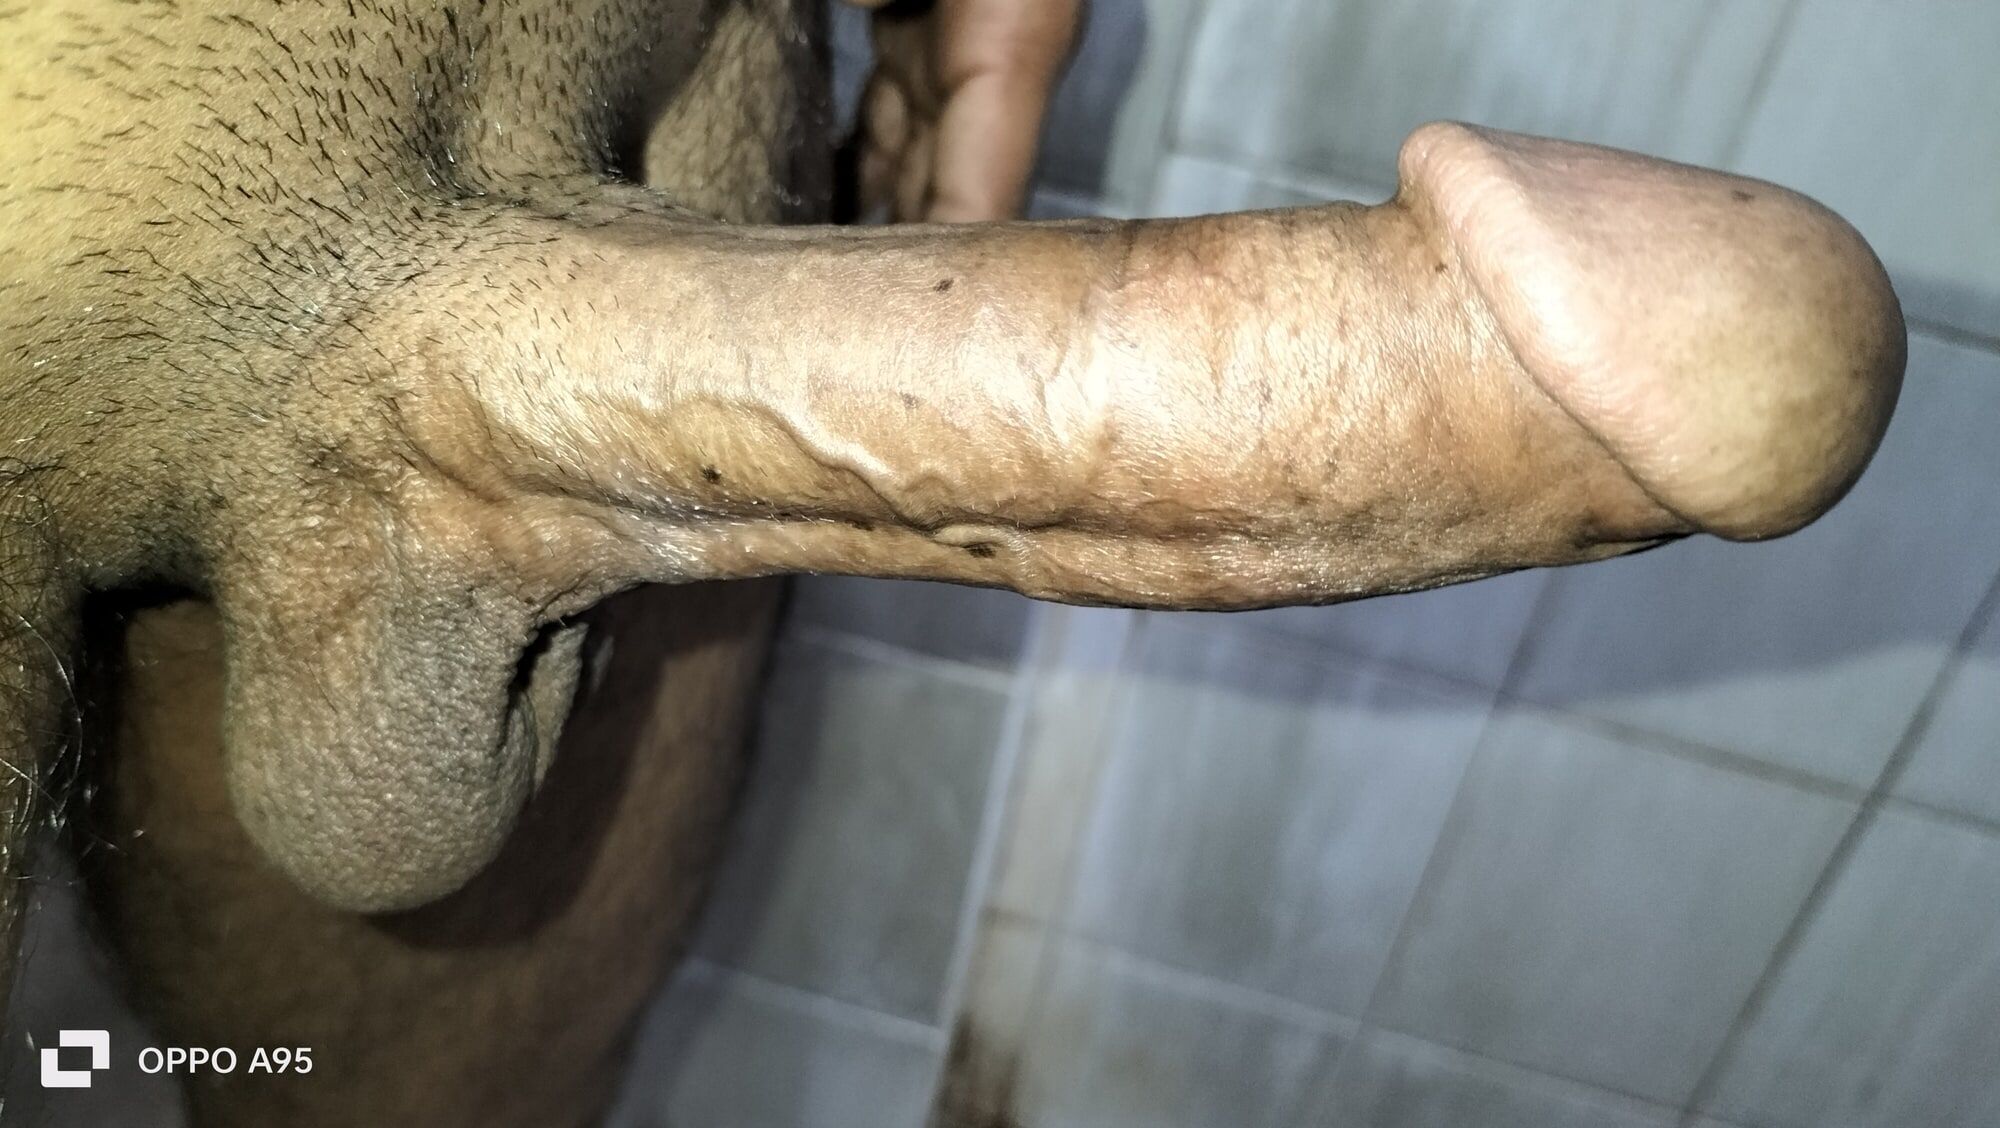 New Pic of my cock  #5